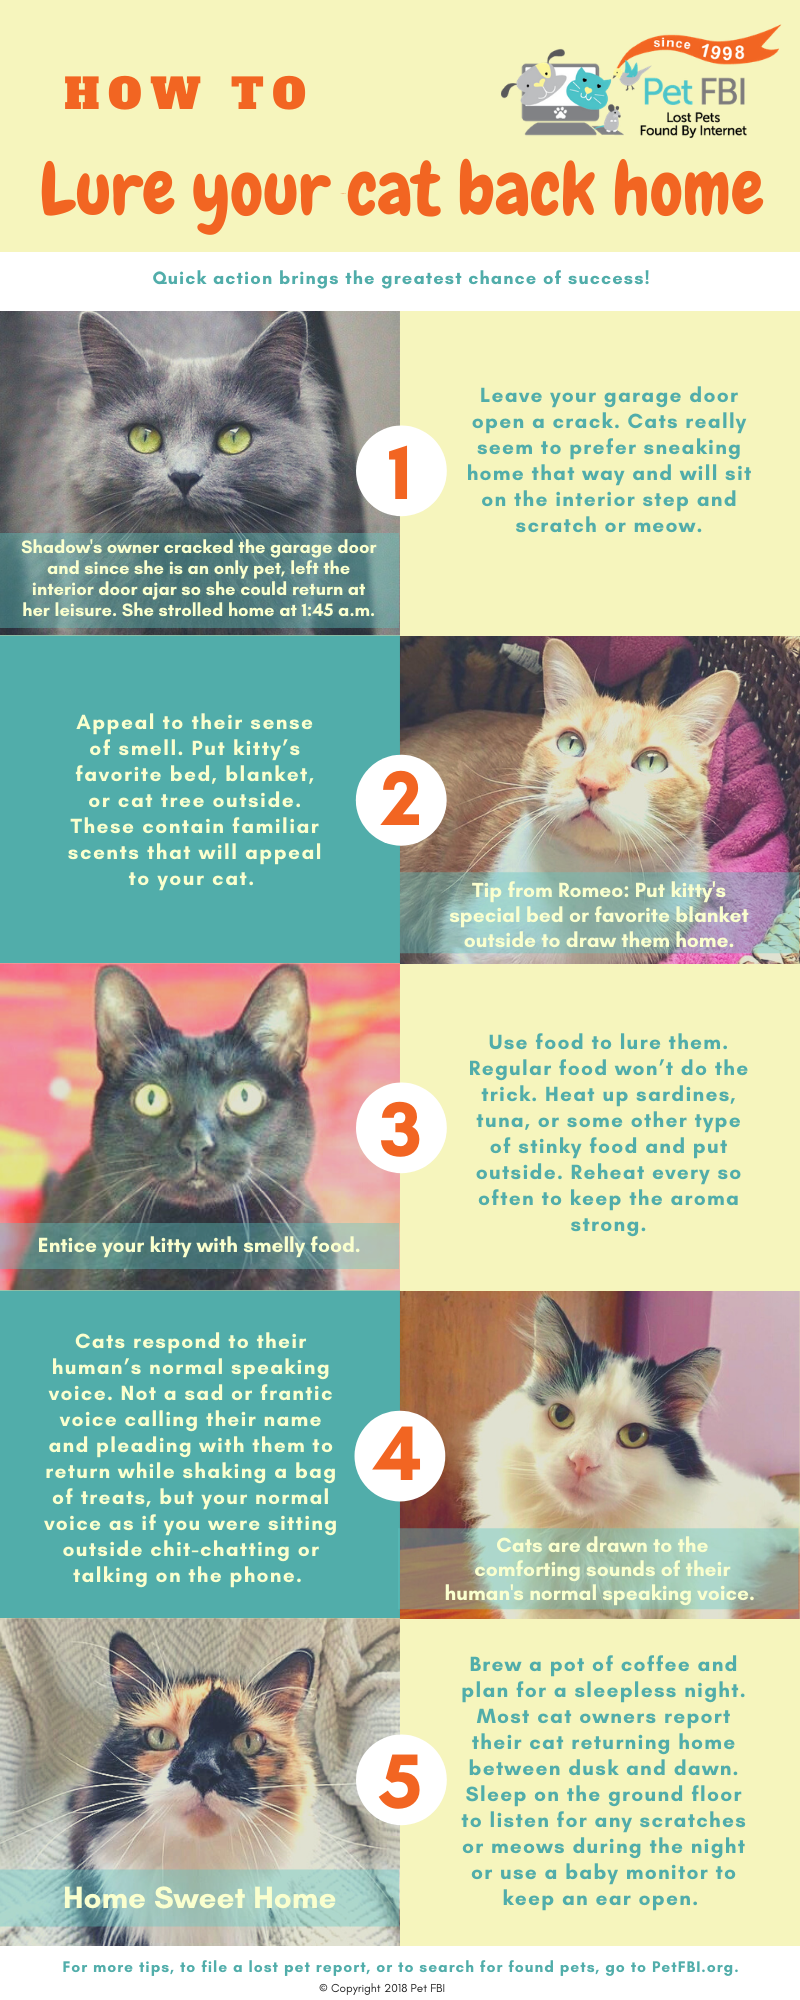 Tips To Lure A Cat Back Home | Pet FBI